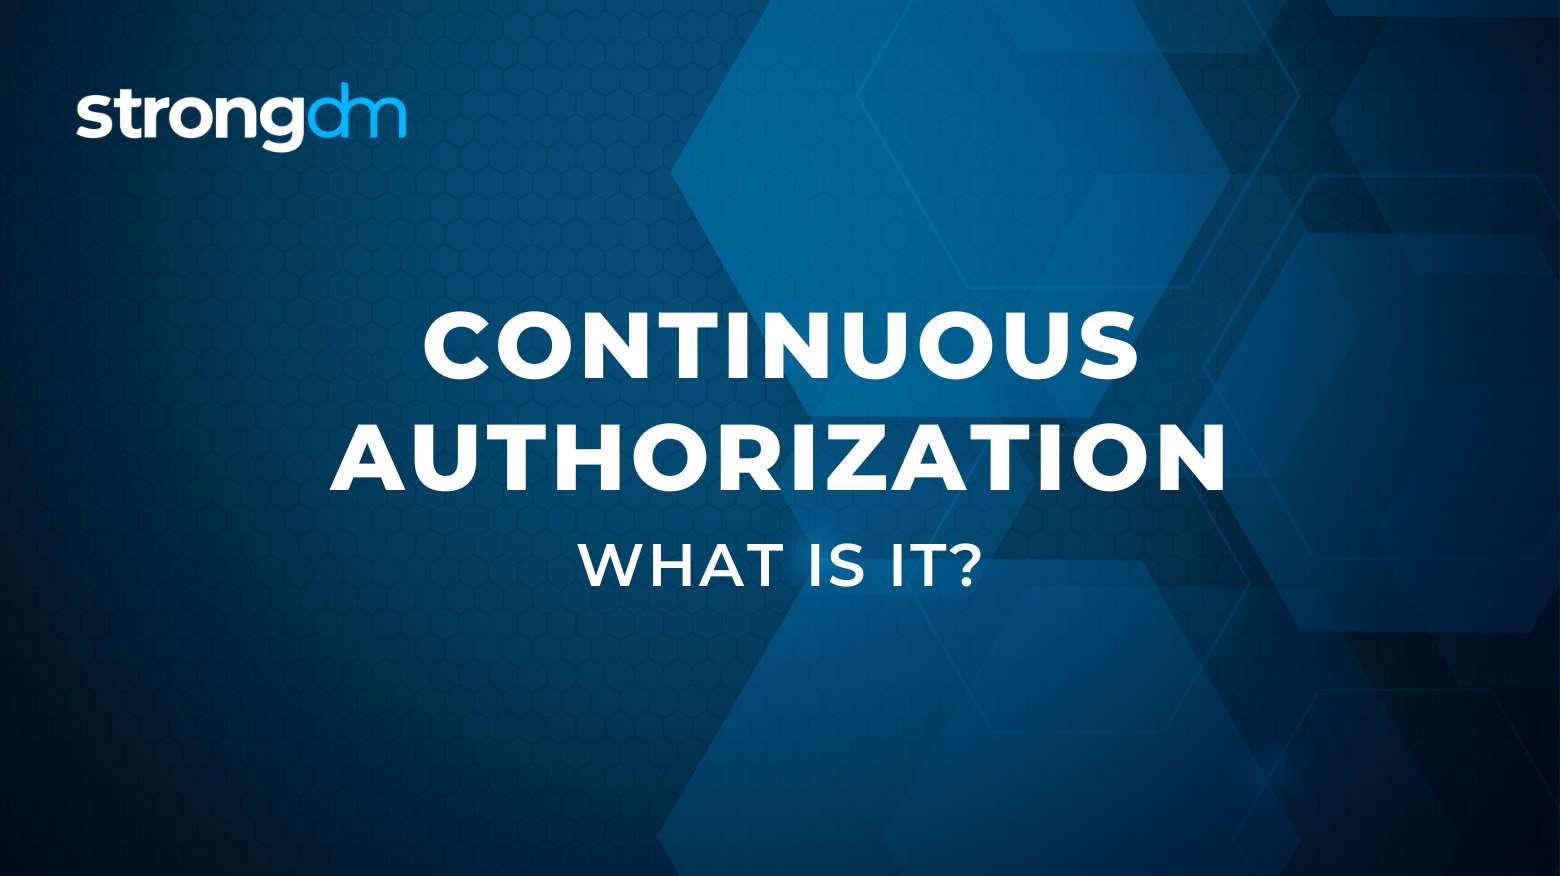 What Is Continuous Authorization?